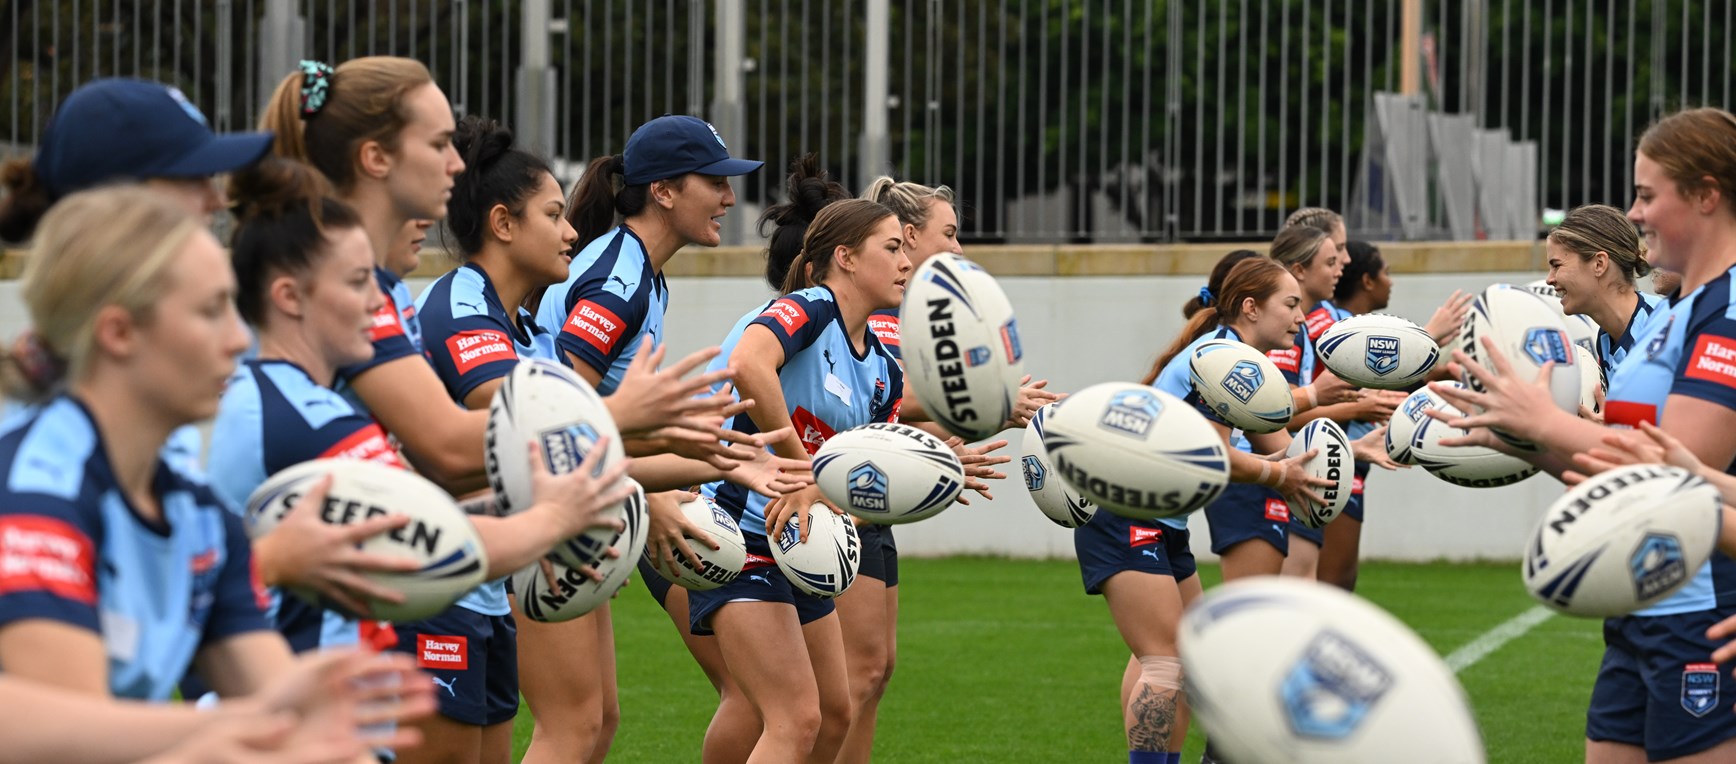 Gallery | Country v City Harvey Norman Women’s Open Age training